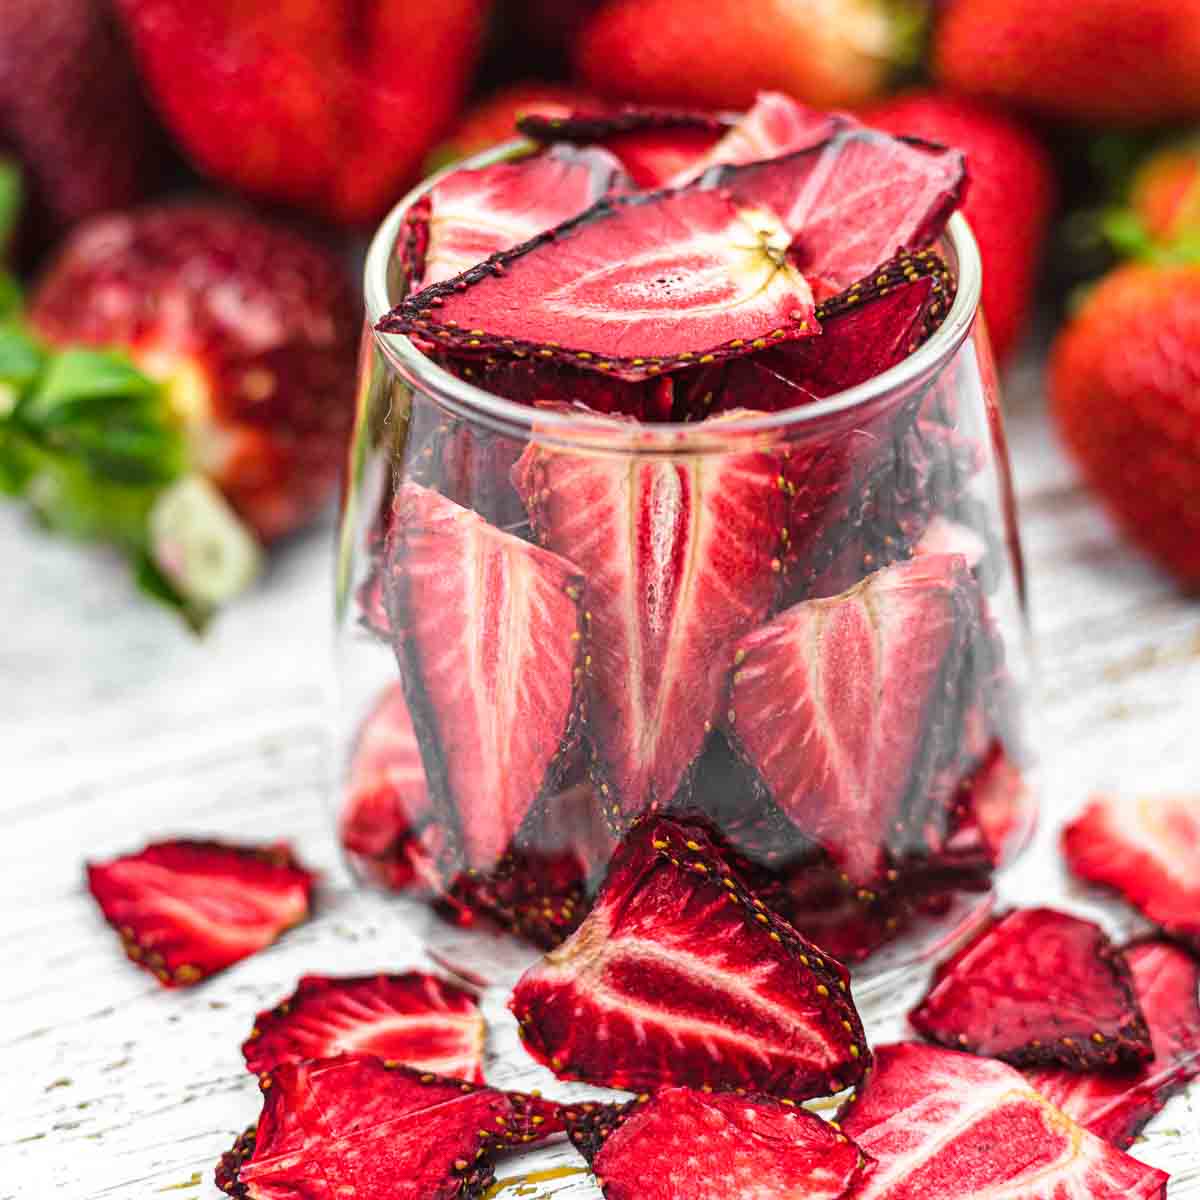 Dried Strawberries in a glass with fresh strawberries in the background.